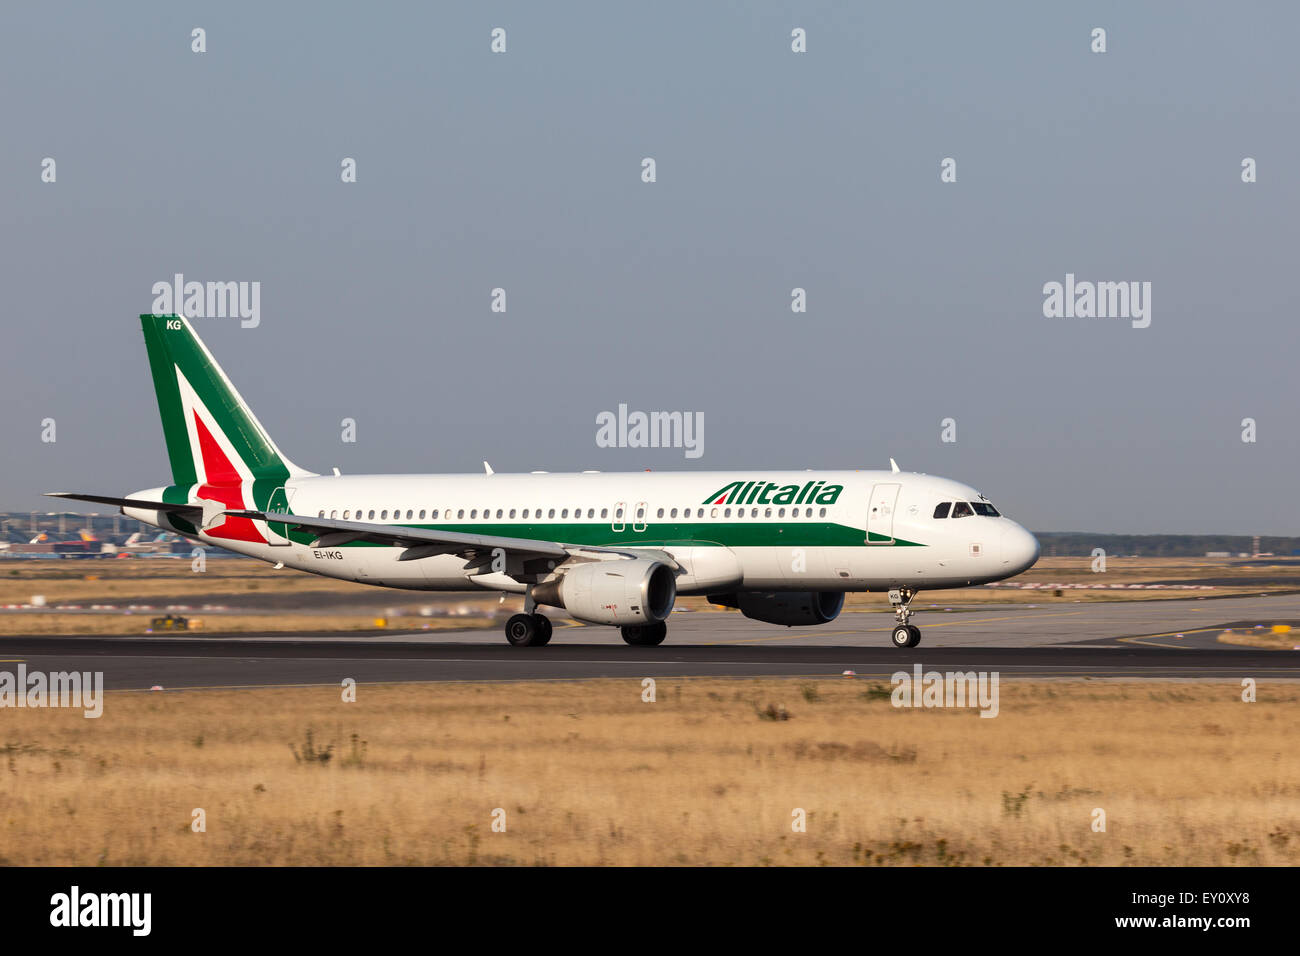 Airbus A320 of the Alitalia Airline ready for take off at the Frankfurt International Airport Stock Photo